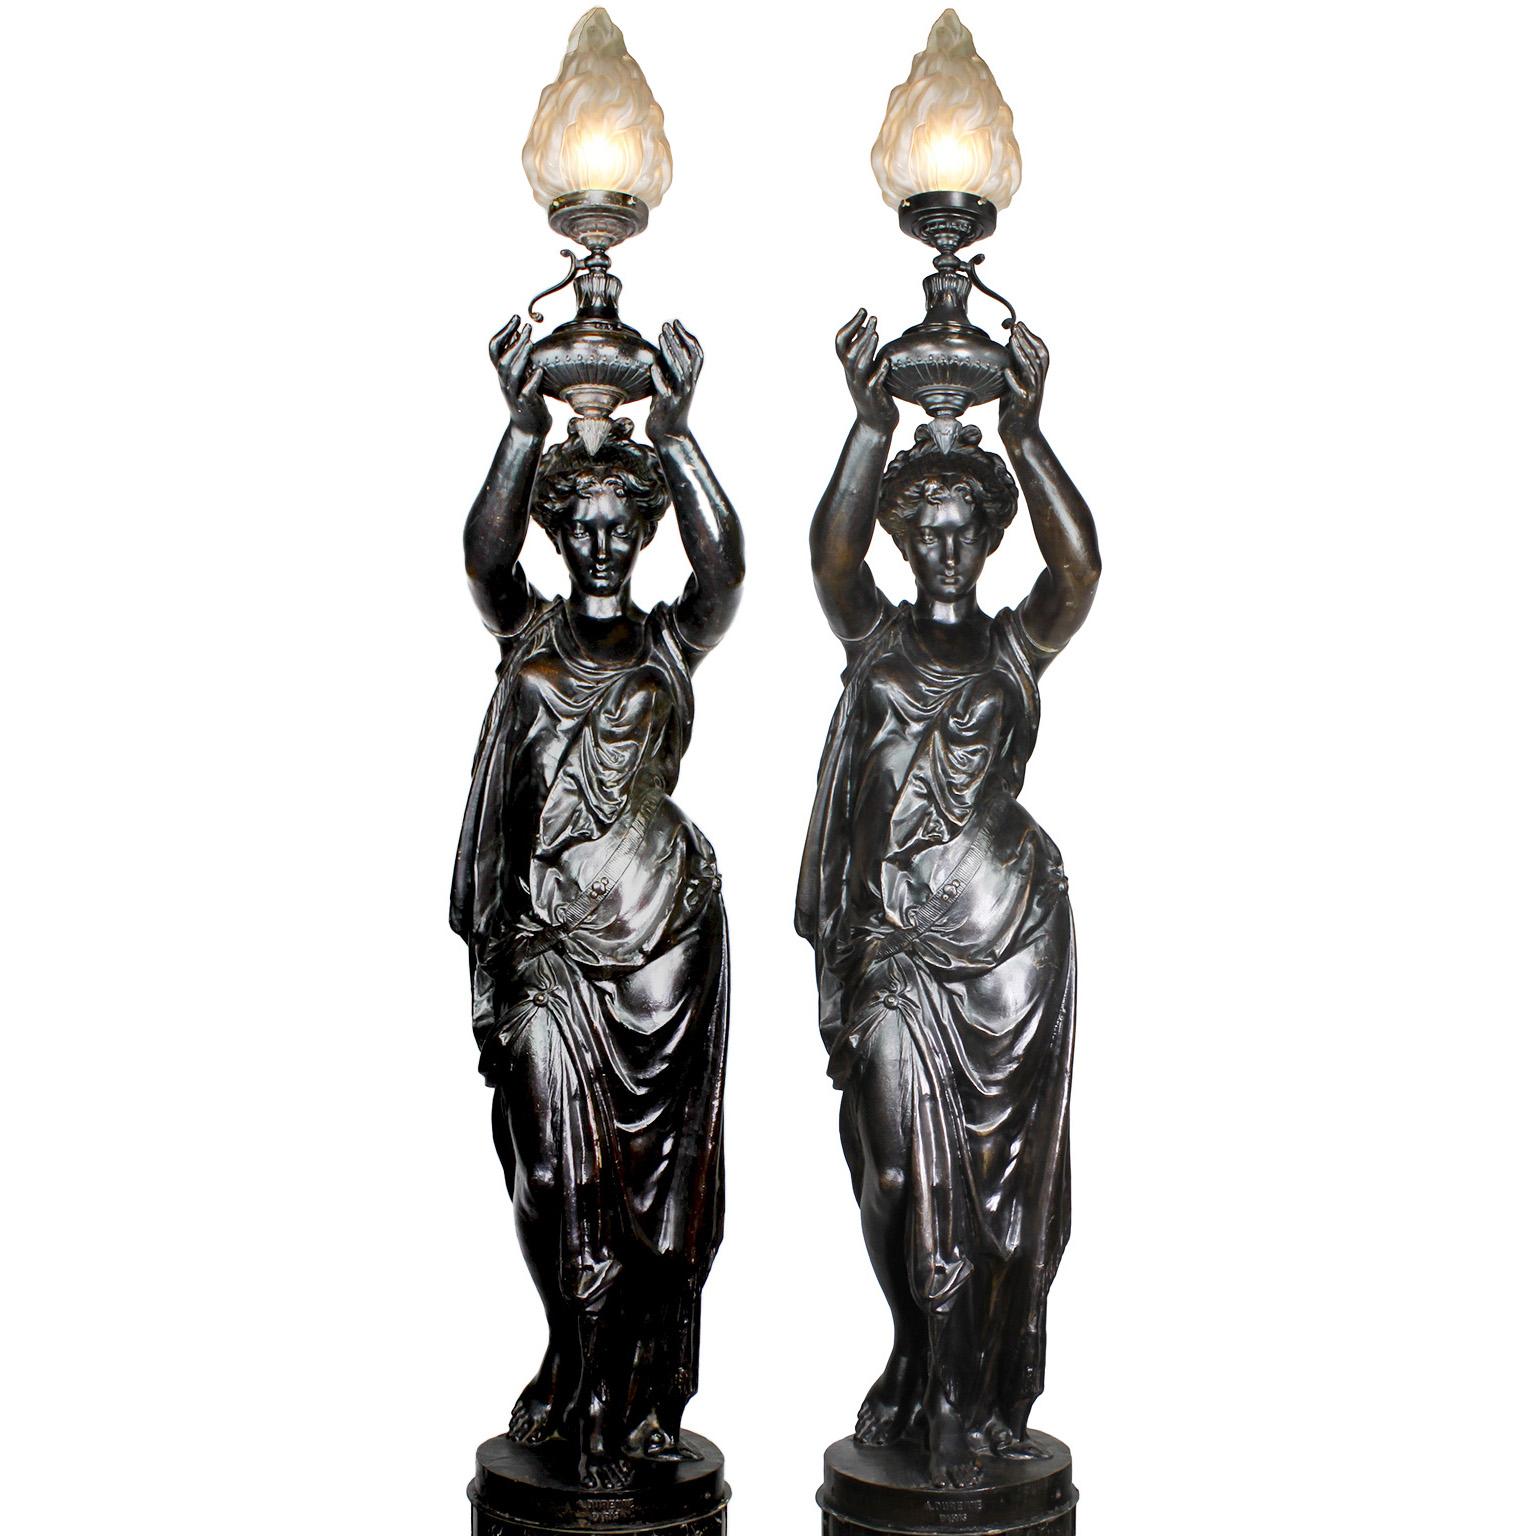 A very fine pair of French 19th-20th century neoclassical style patinated cast iron figural torchères by A. Durenne, Paris, each representing a figure of a standing young maiden, her arms raised forward while holding a a flaming urn gas light (Now